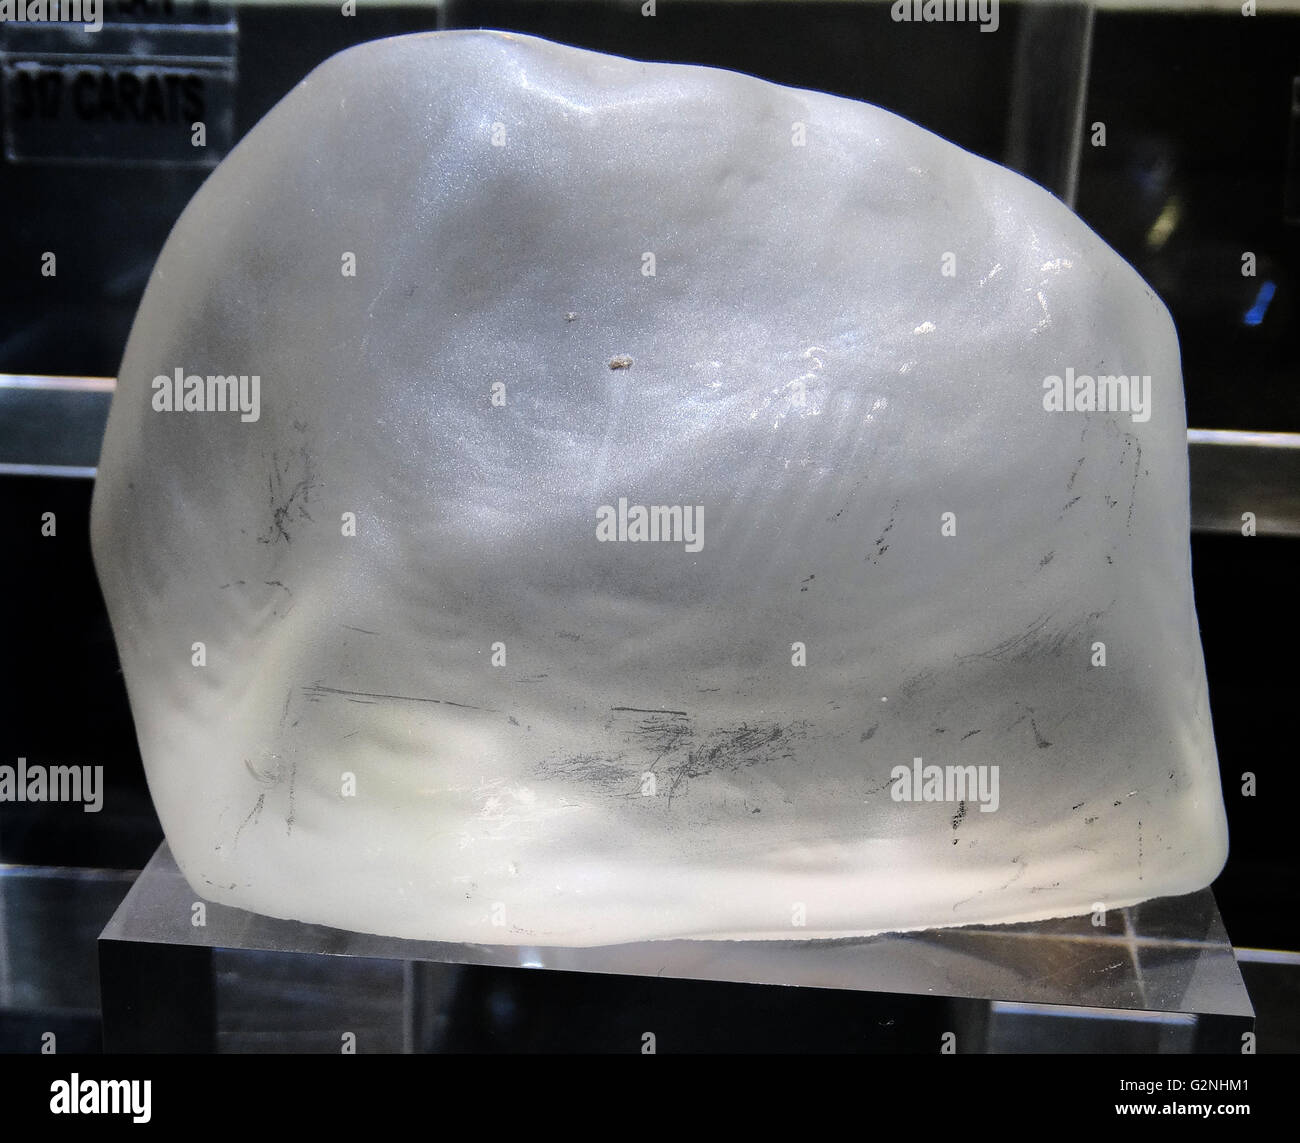 Replica of the Cullinan Diamond, the largest non carbonado and largest gem-quality diamond ever found, at 3106.75 carat (621.35 g, 1.37 lb) rough weight. About 10.5 cm (4.1 inches) long in its largest dimension, it was found on 26 January 1905, in the Premier No. 2 mine, near Pretoria, South Africa. Dated 2014 Stock Photo